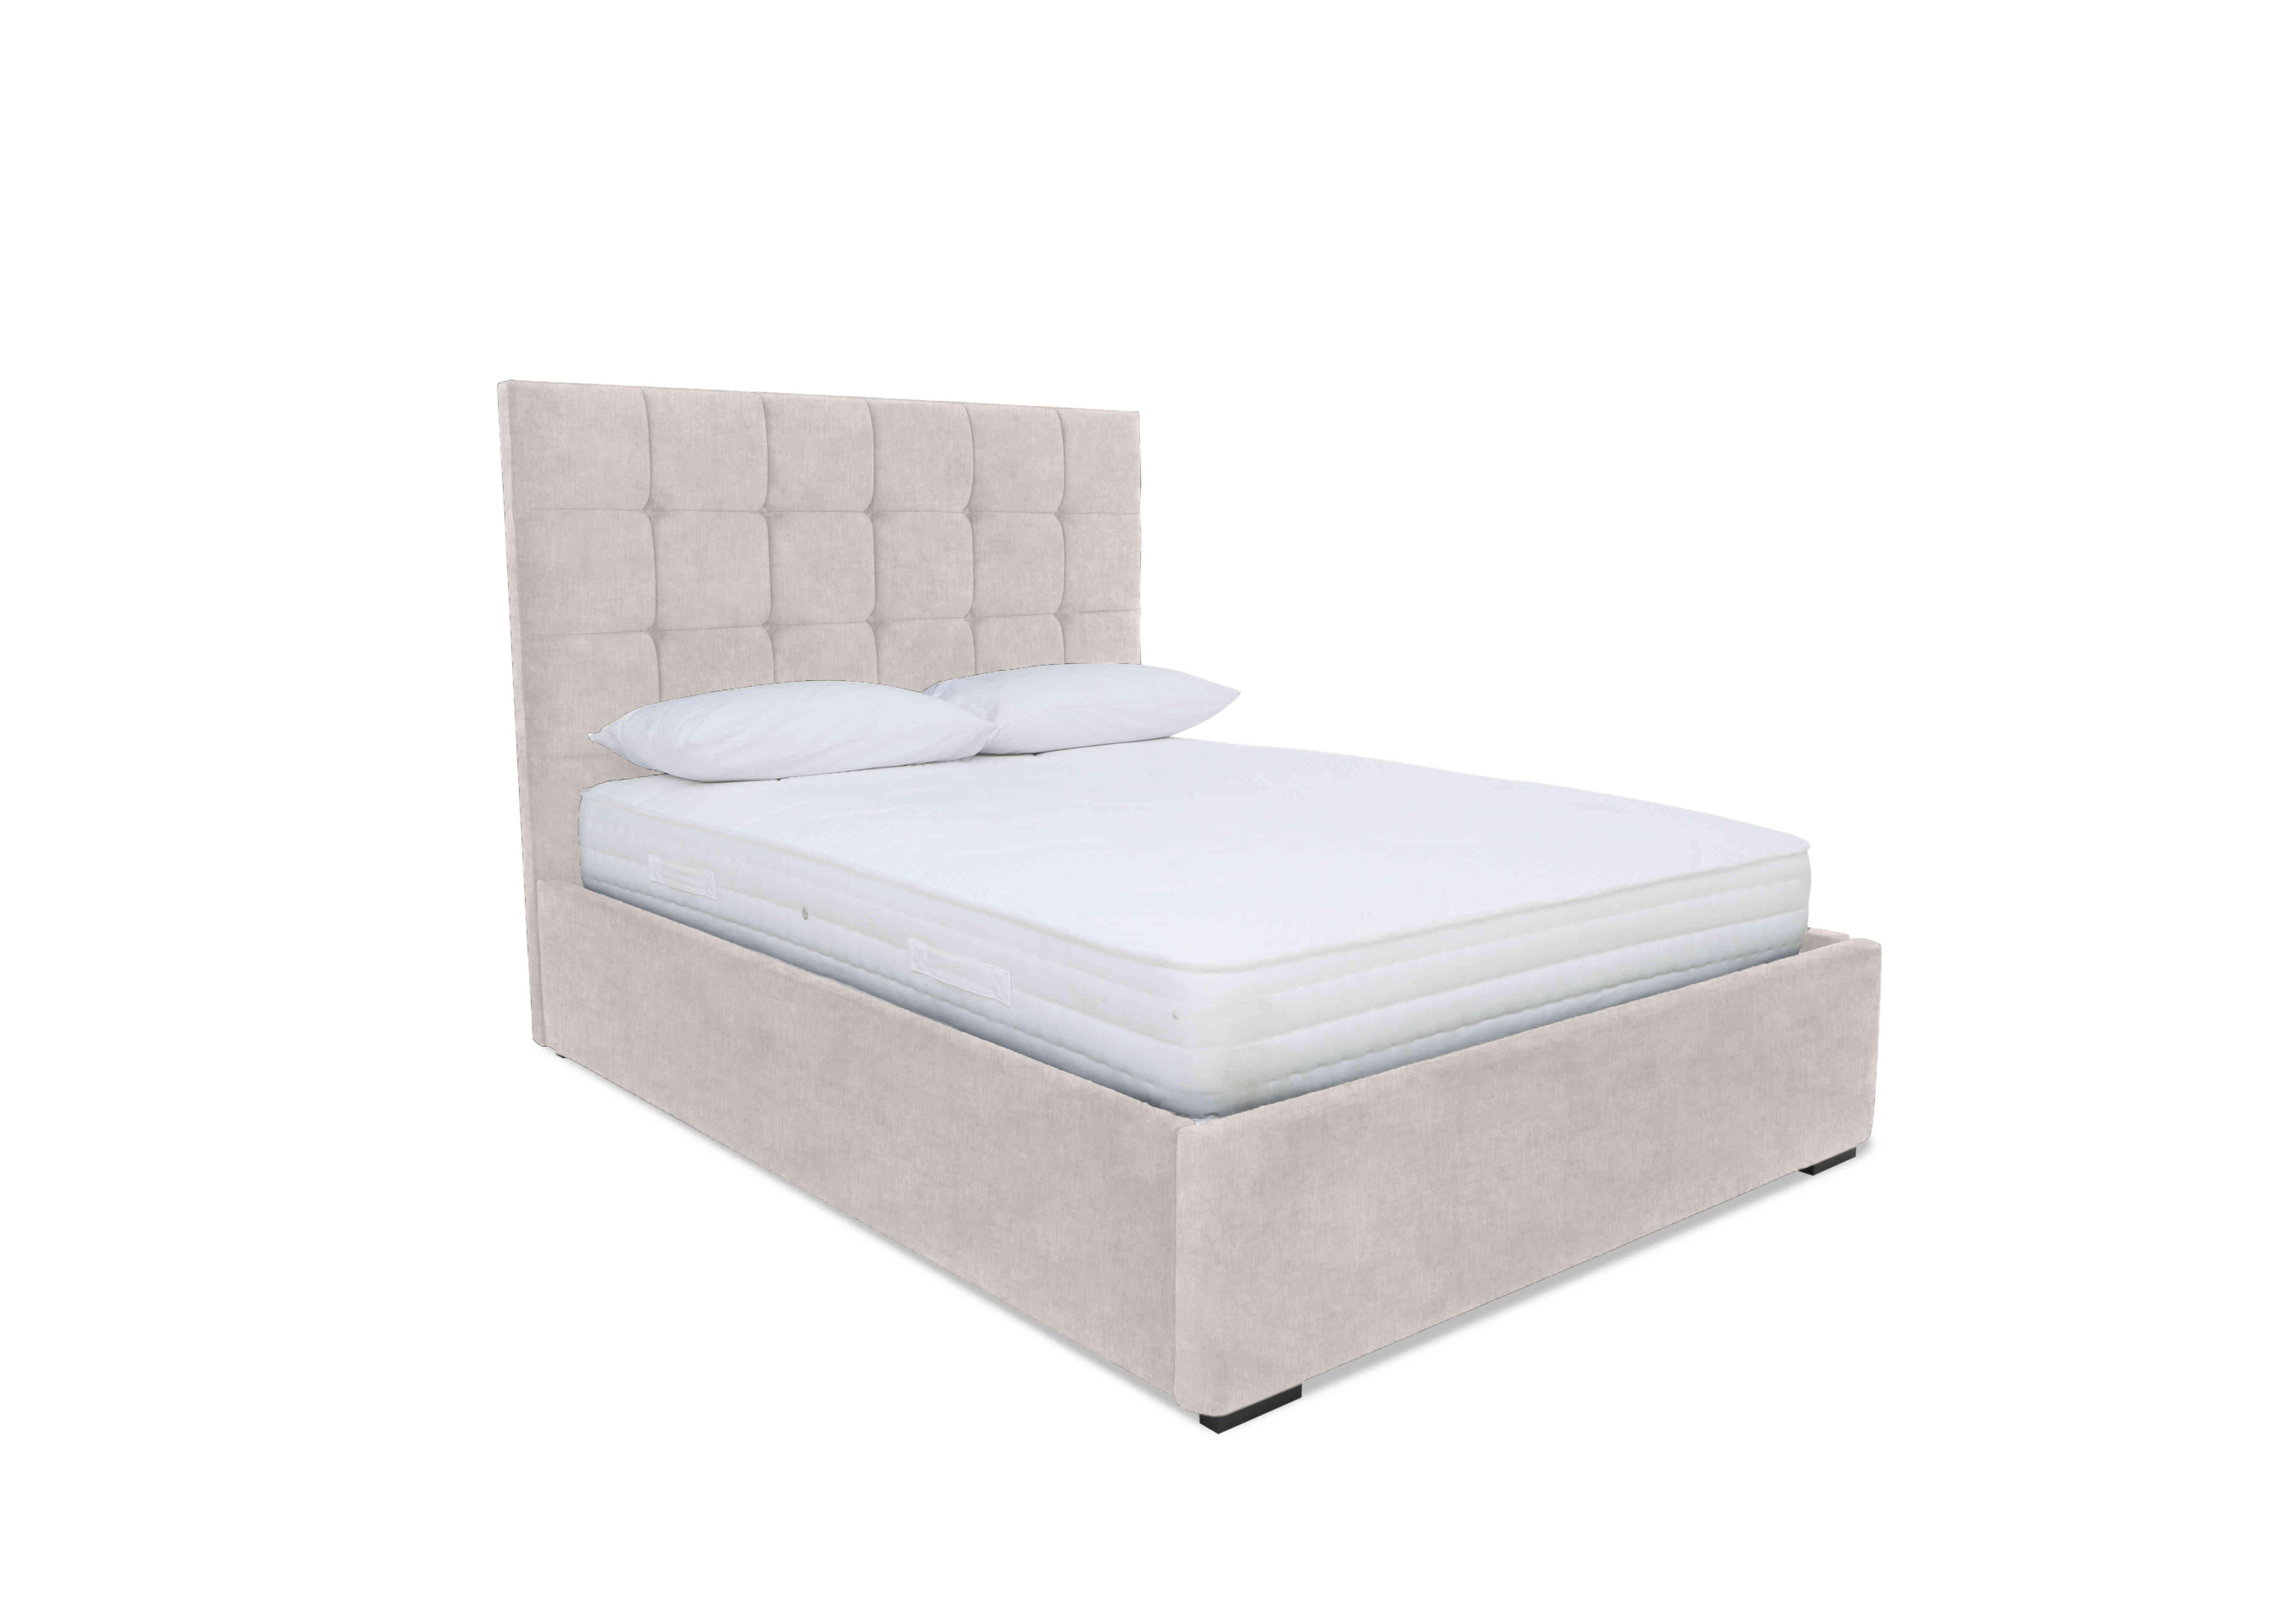 Milne Ottoman Bed Frame in Lace Ivory on Furniture Village